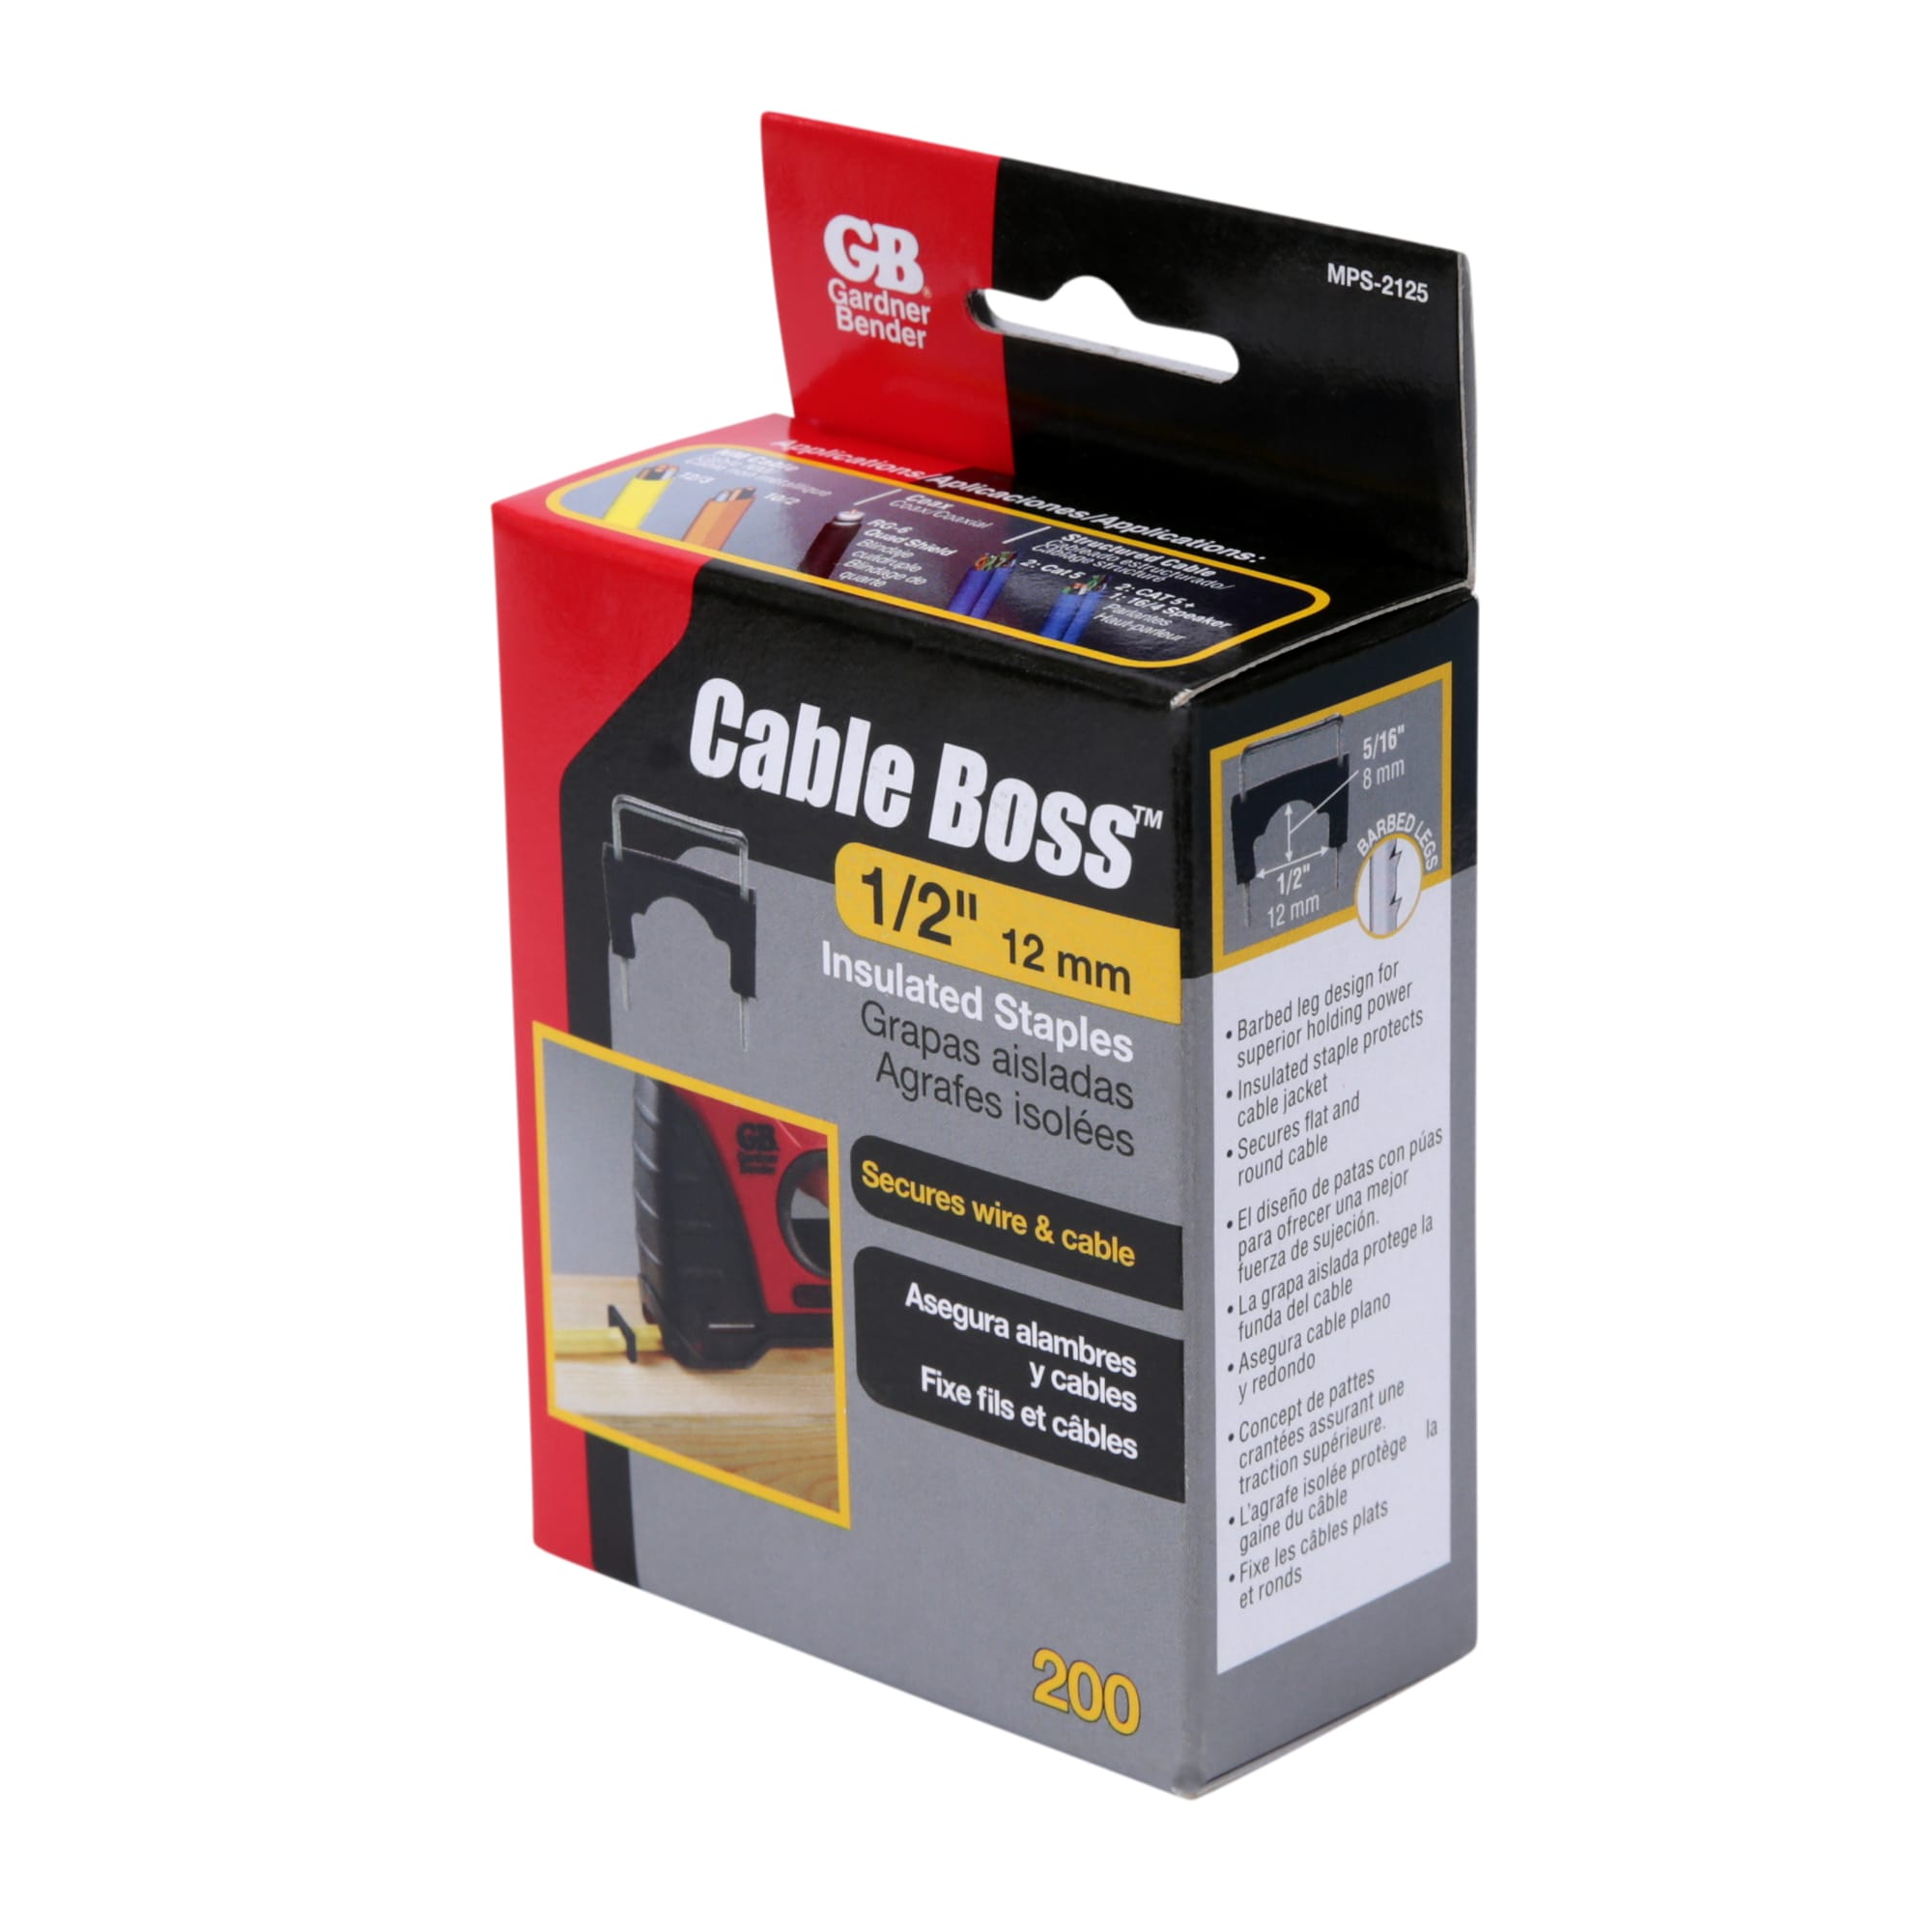 Gardner Bender Cable Boss Professional Grade Staple Gun for Secures NM,  Coaxial, VDV, Low Voltage Wire and Cable MSG-501 - The Home Depot